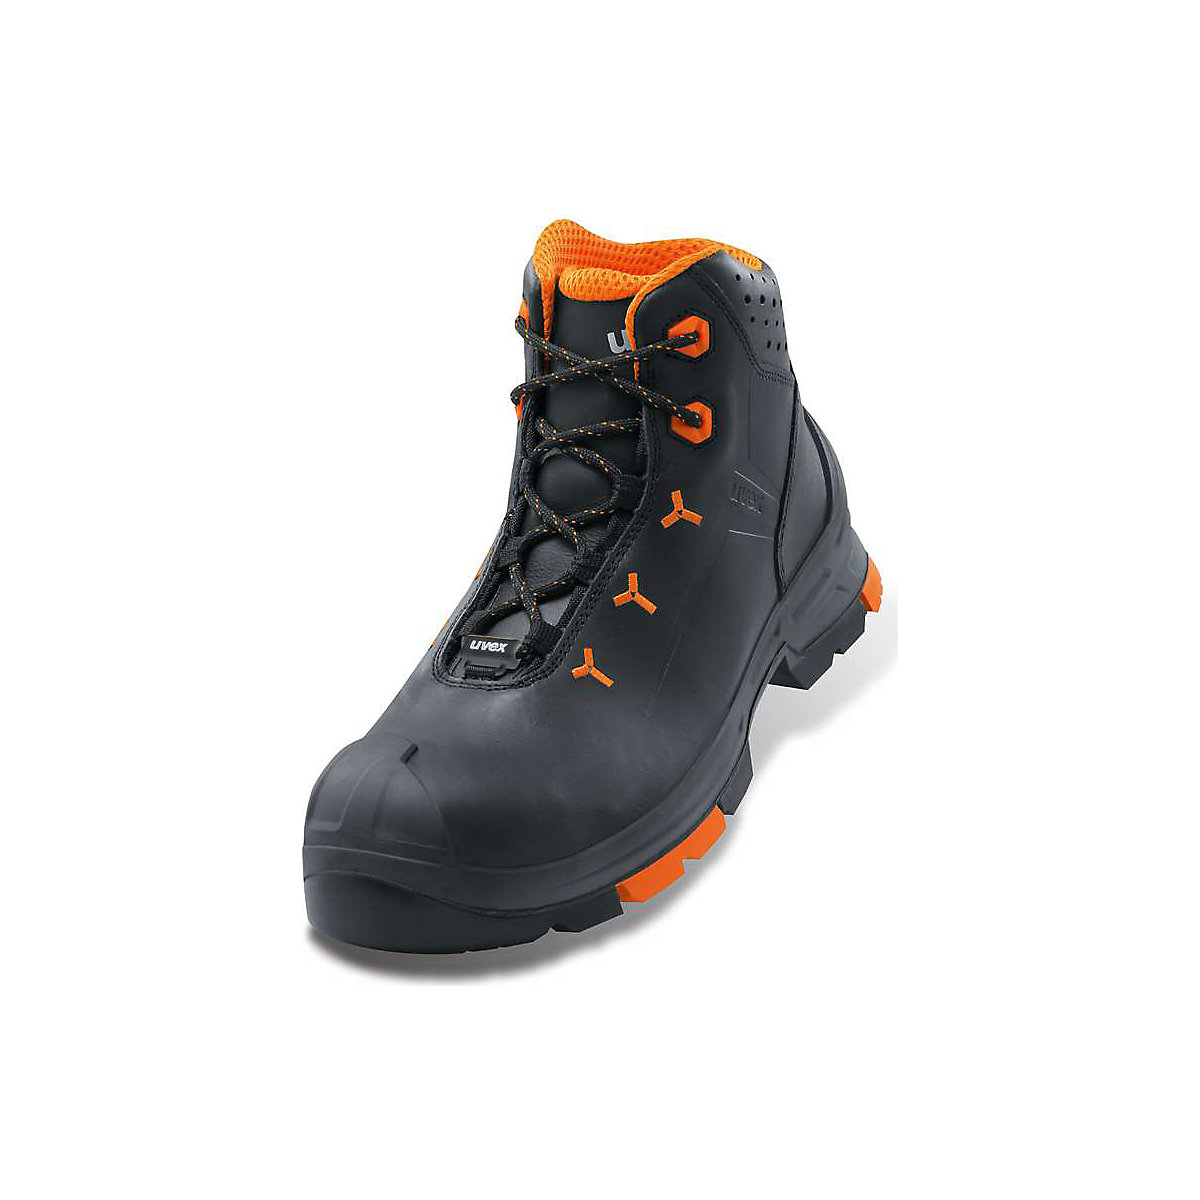 ESD S3 SRC safety boot - Uvex